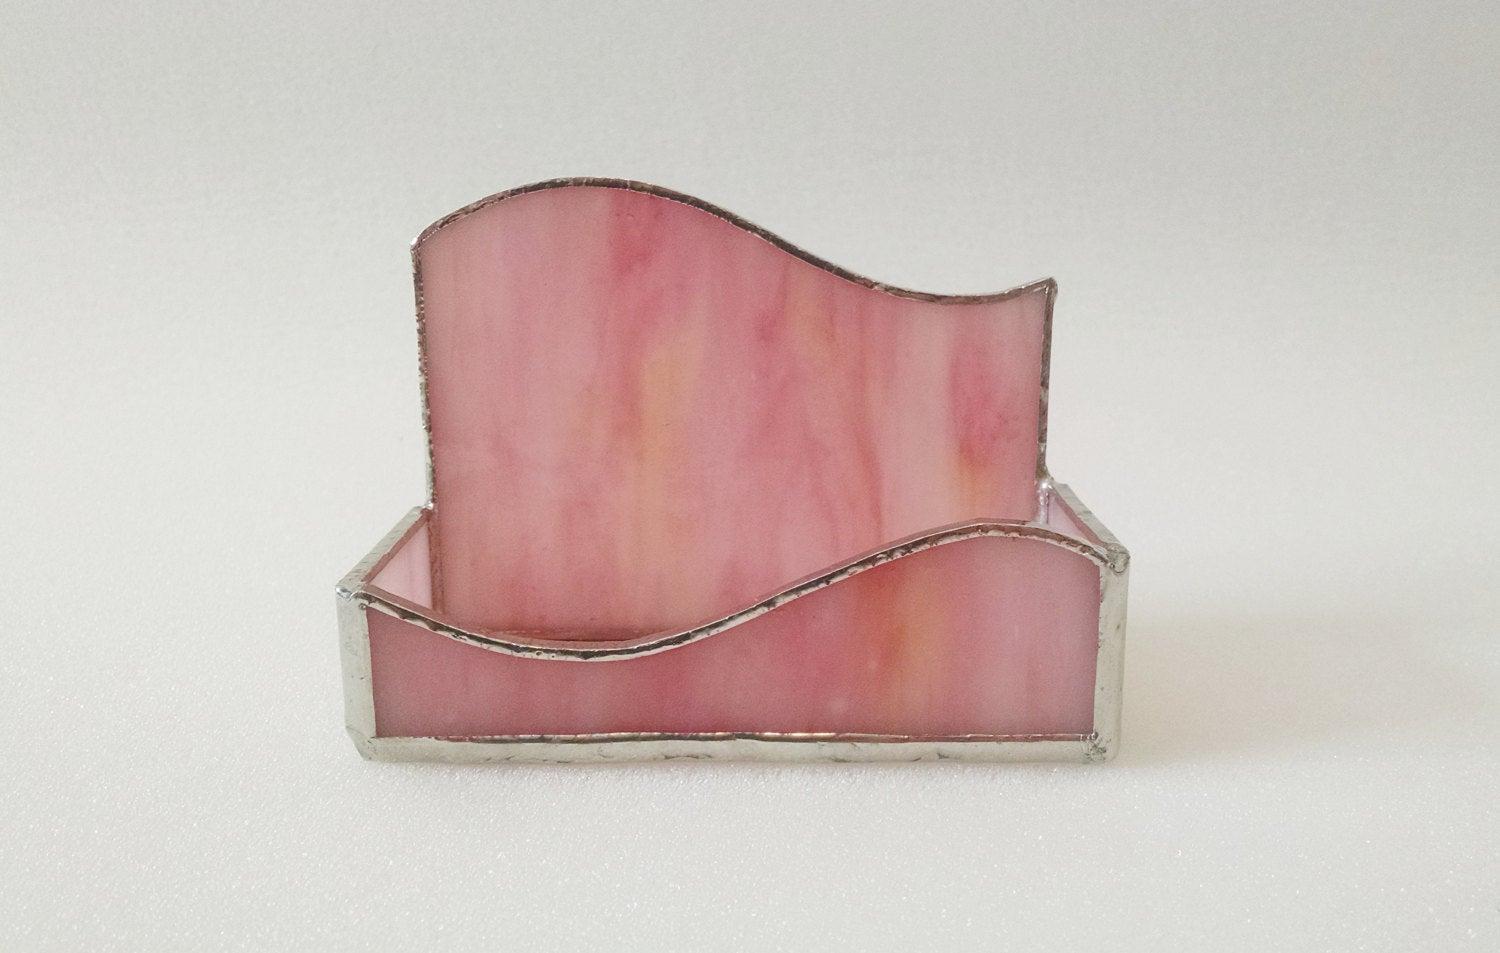 Business Card Holder, Pink Swirled Opalescent Glass, Custom Colors Available